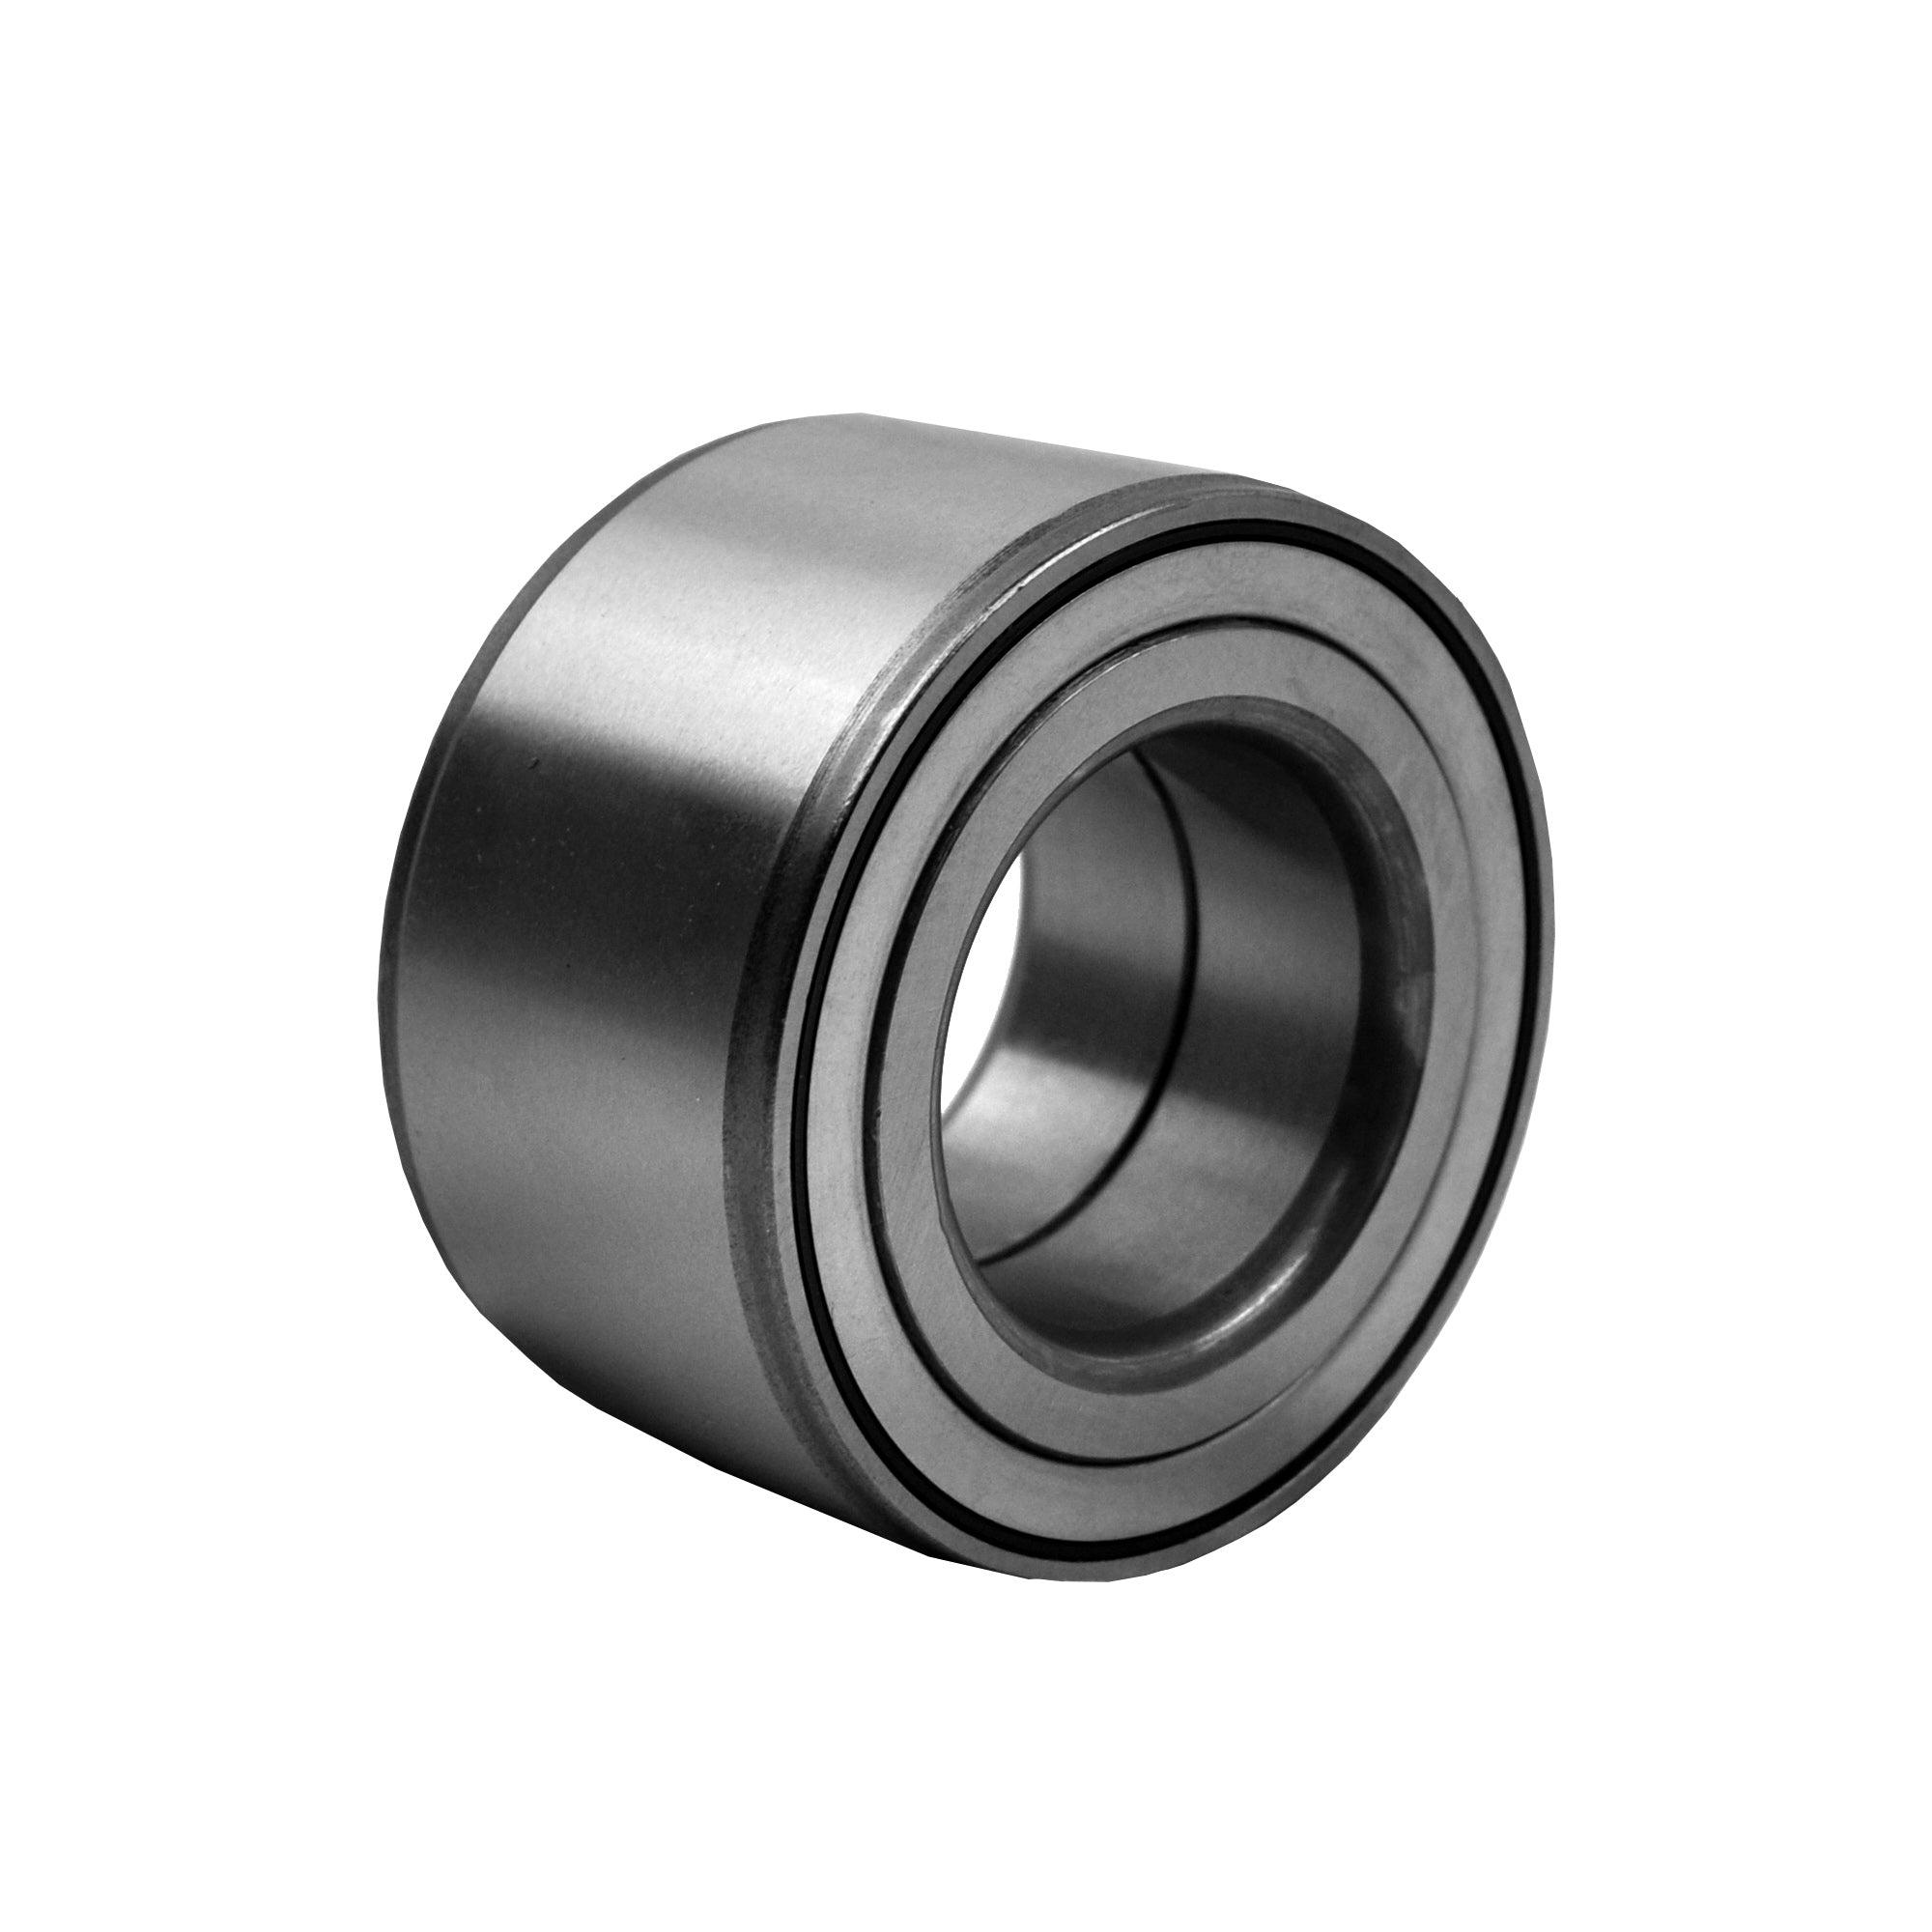 Wheel Bearing for Yamaha Grizzly 450 